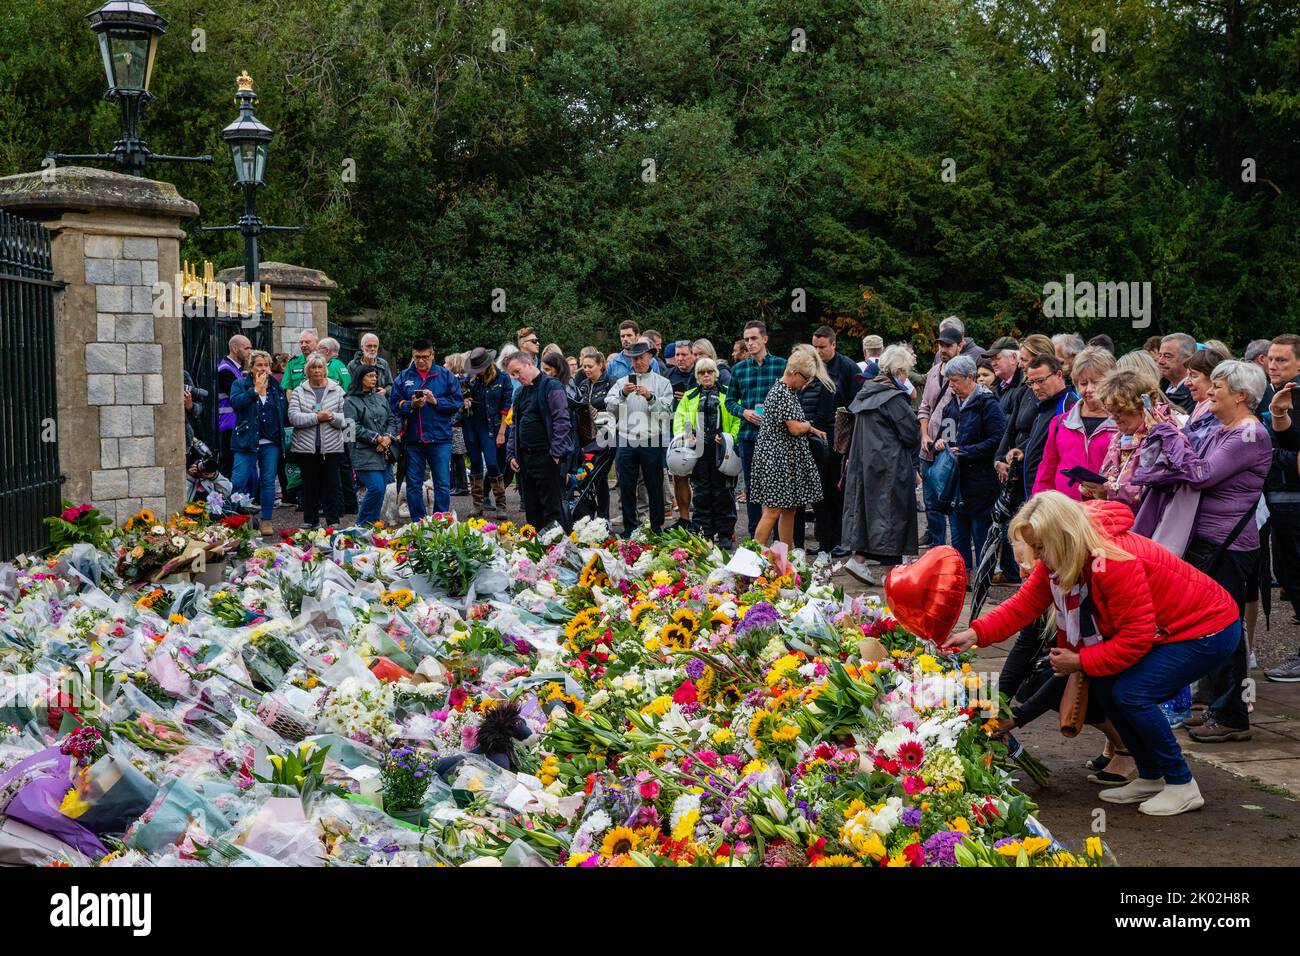 Windsor, UK. 9th September, 2022. Visitors leave floral tributes outside Cambridge Gate at Windsor Castle a day after the death of Queen Elizabeth II. Queen Elizabeth II, the UK's longest-serving monarch, died at Balmoral aged 96 after a reign lasting 70 years. Credit: Mark Kerrison/Alamy Live News Stock Photo